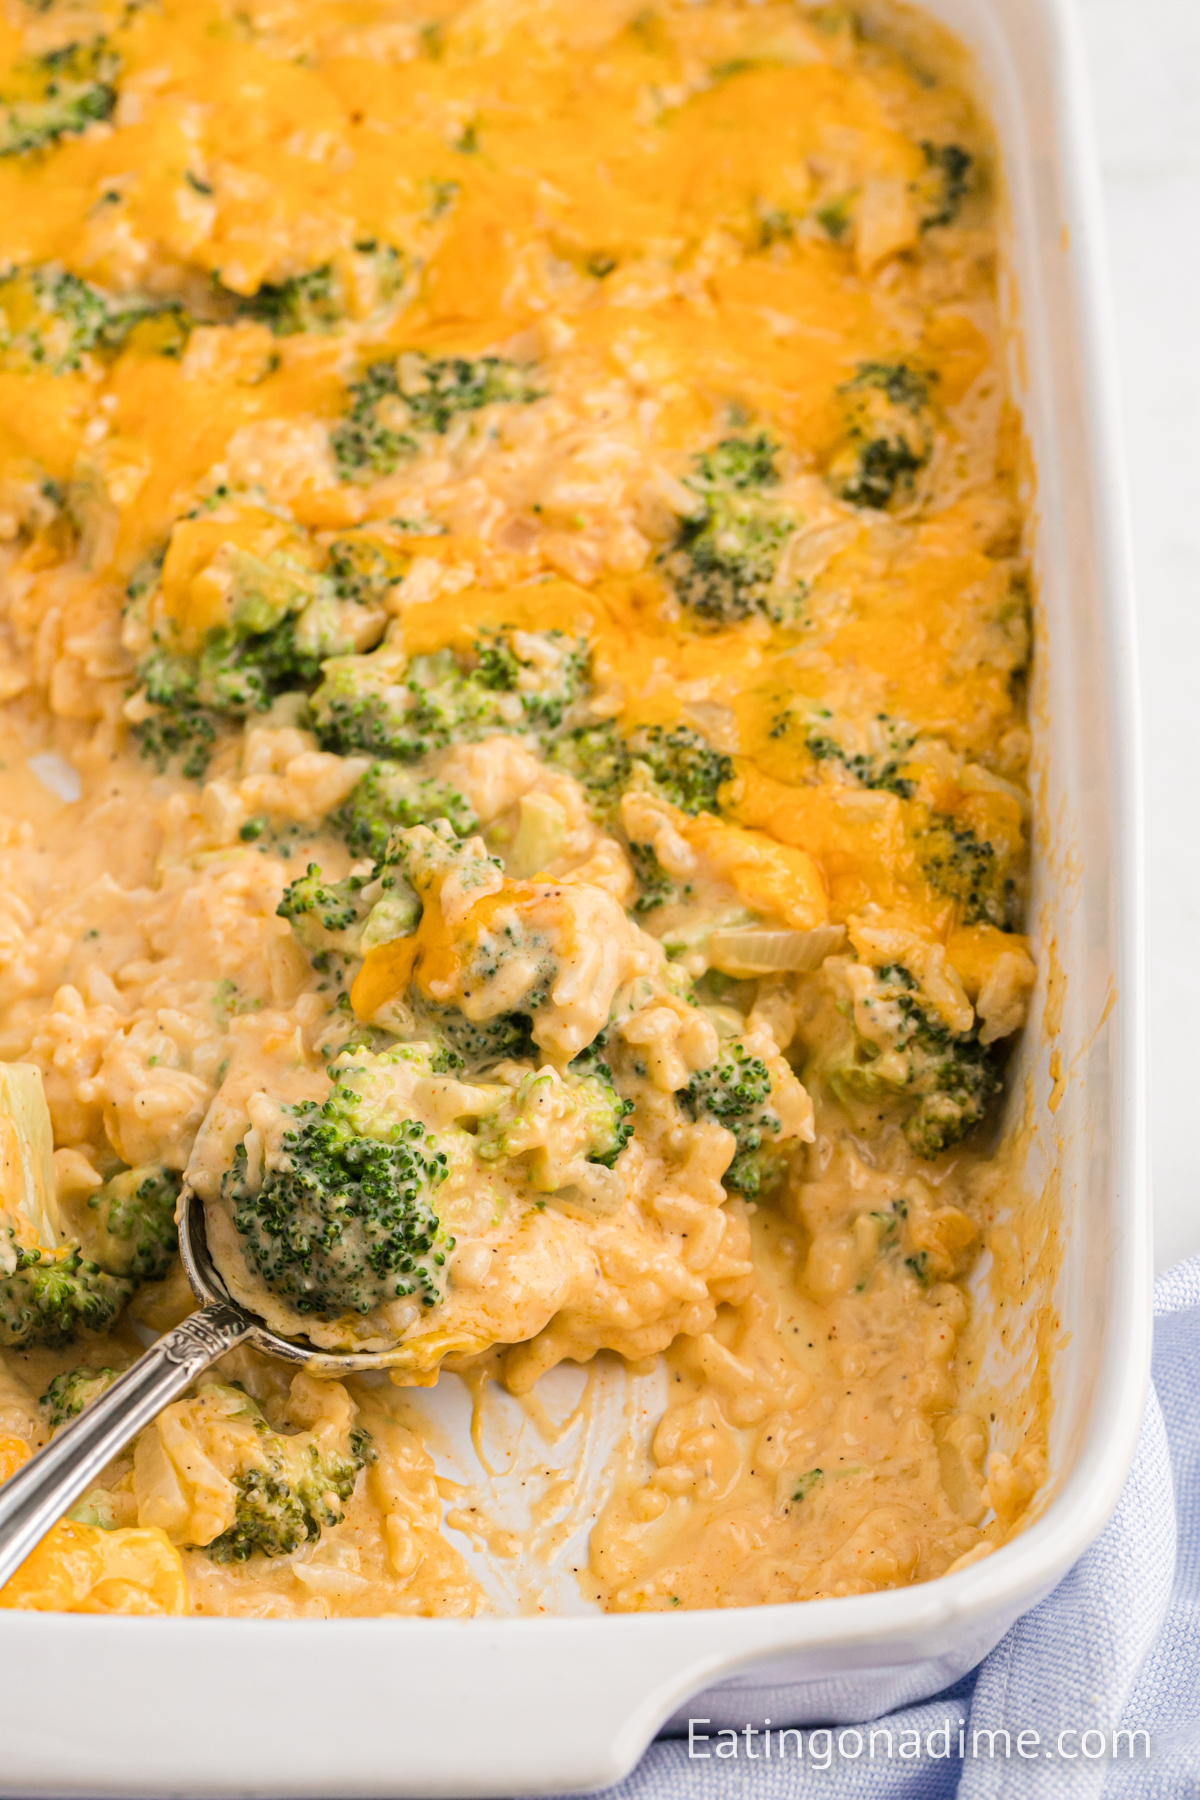 Broccoli and Rice casserole and a baking dish